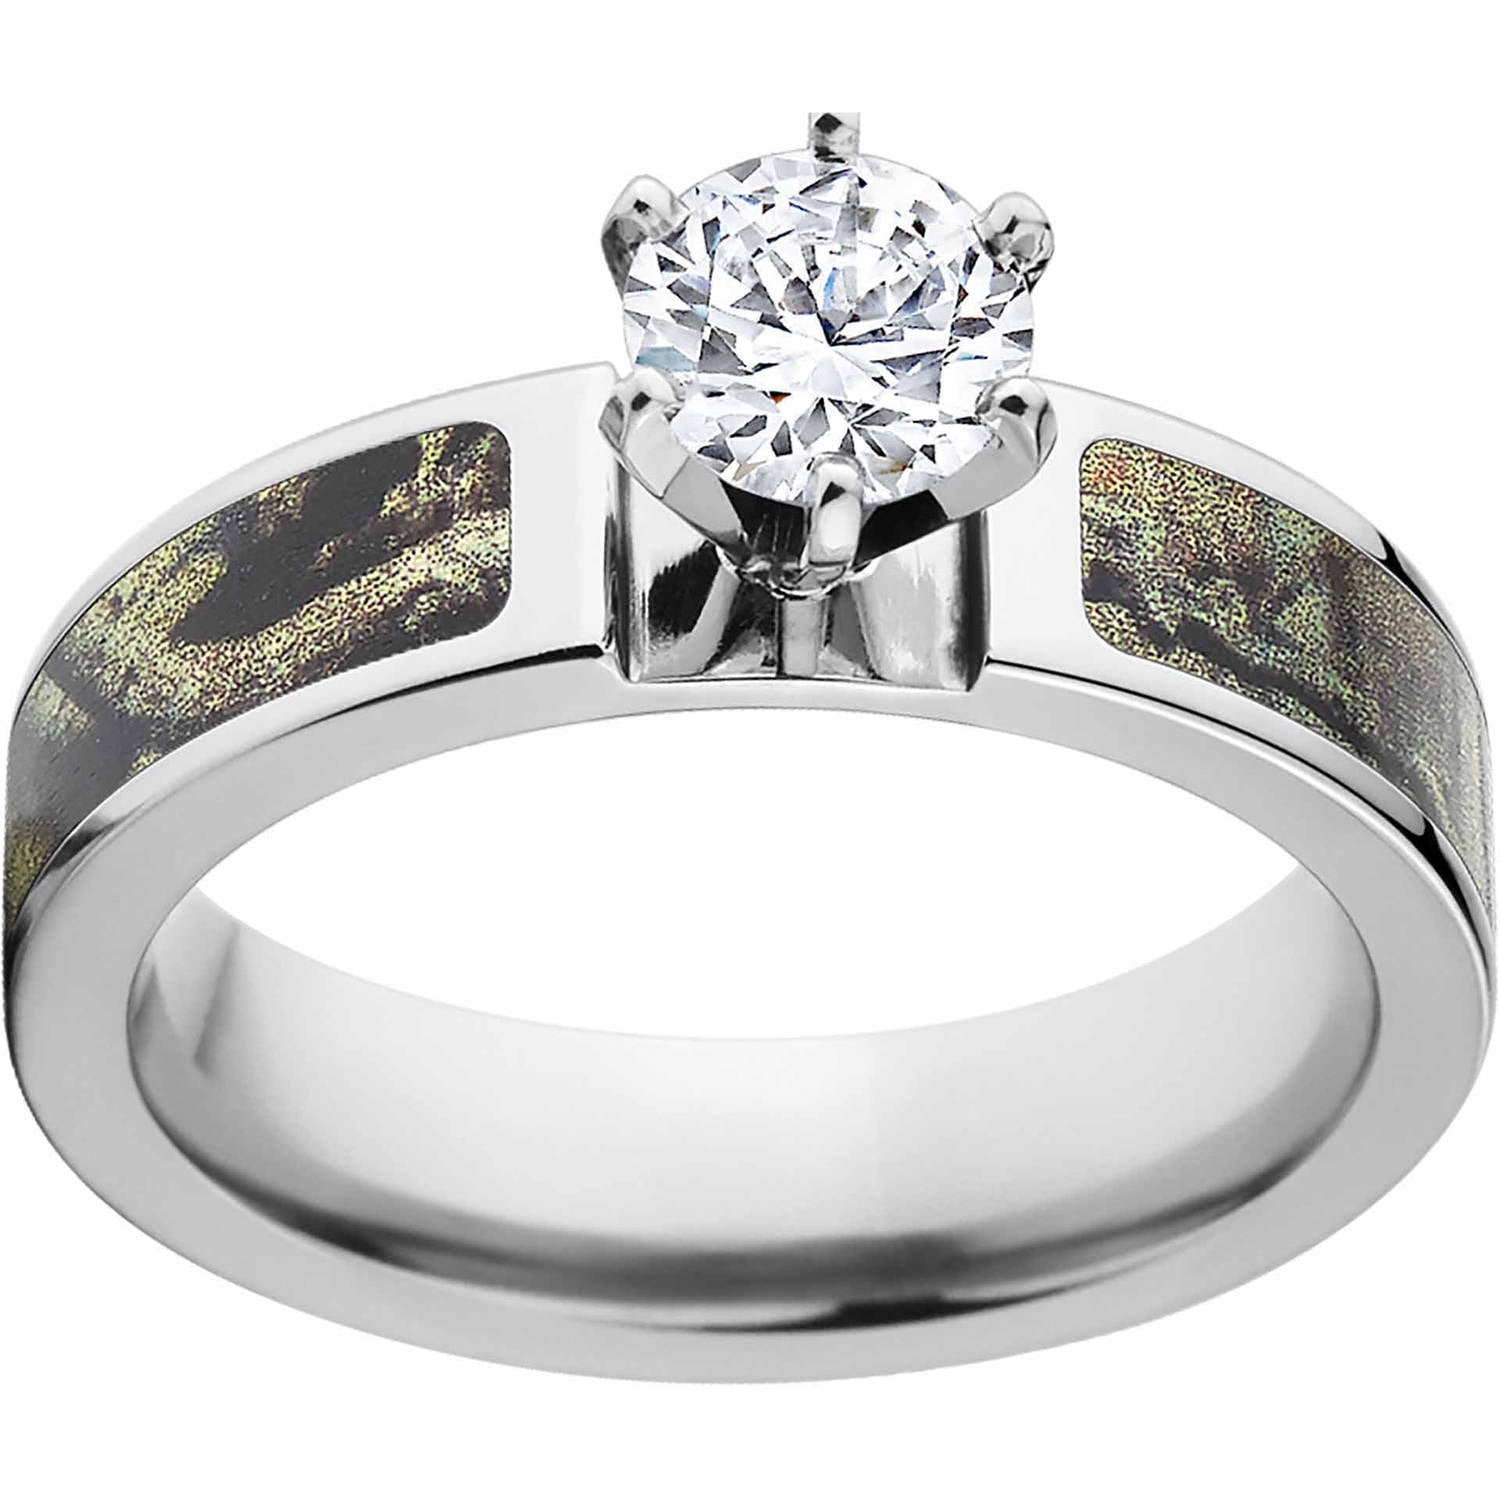 Groove Life - Realtree MAX5™ Camo Ring